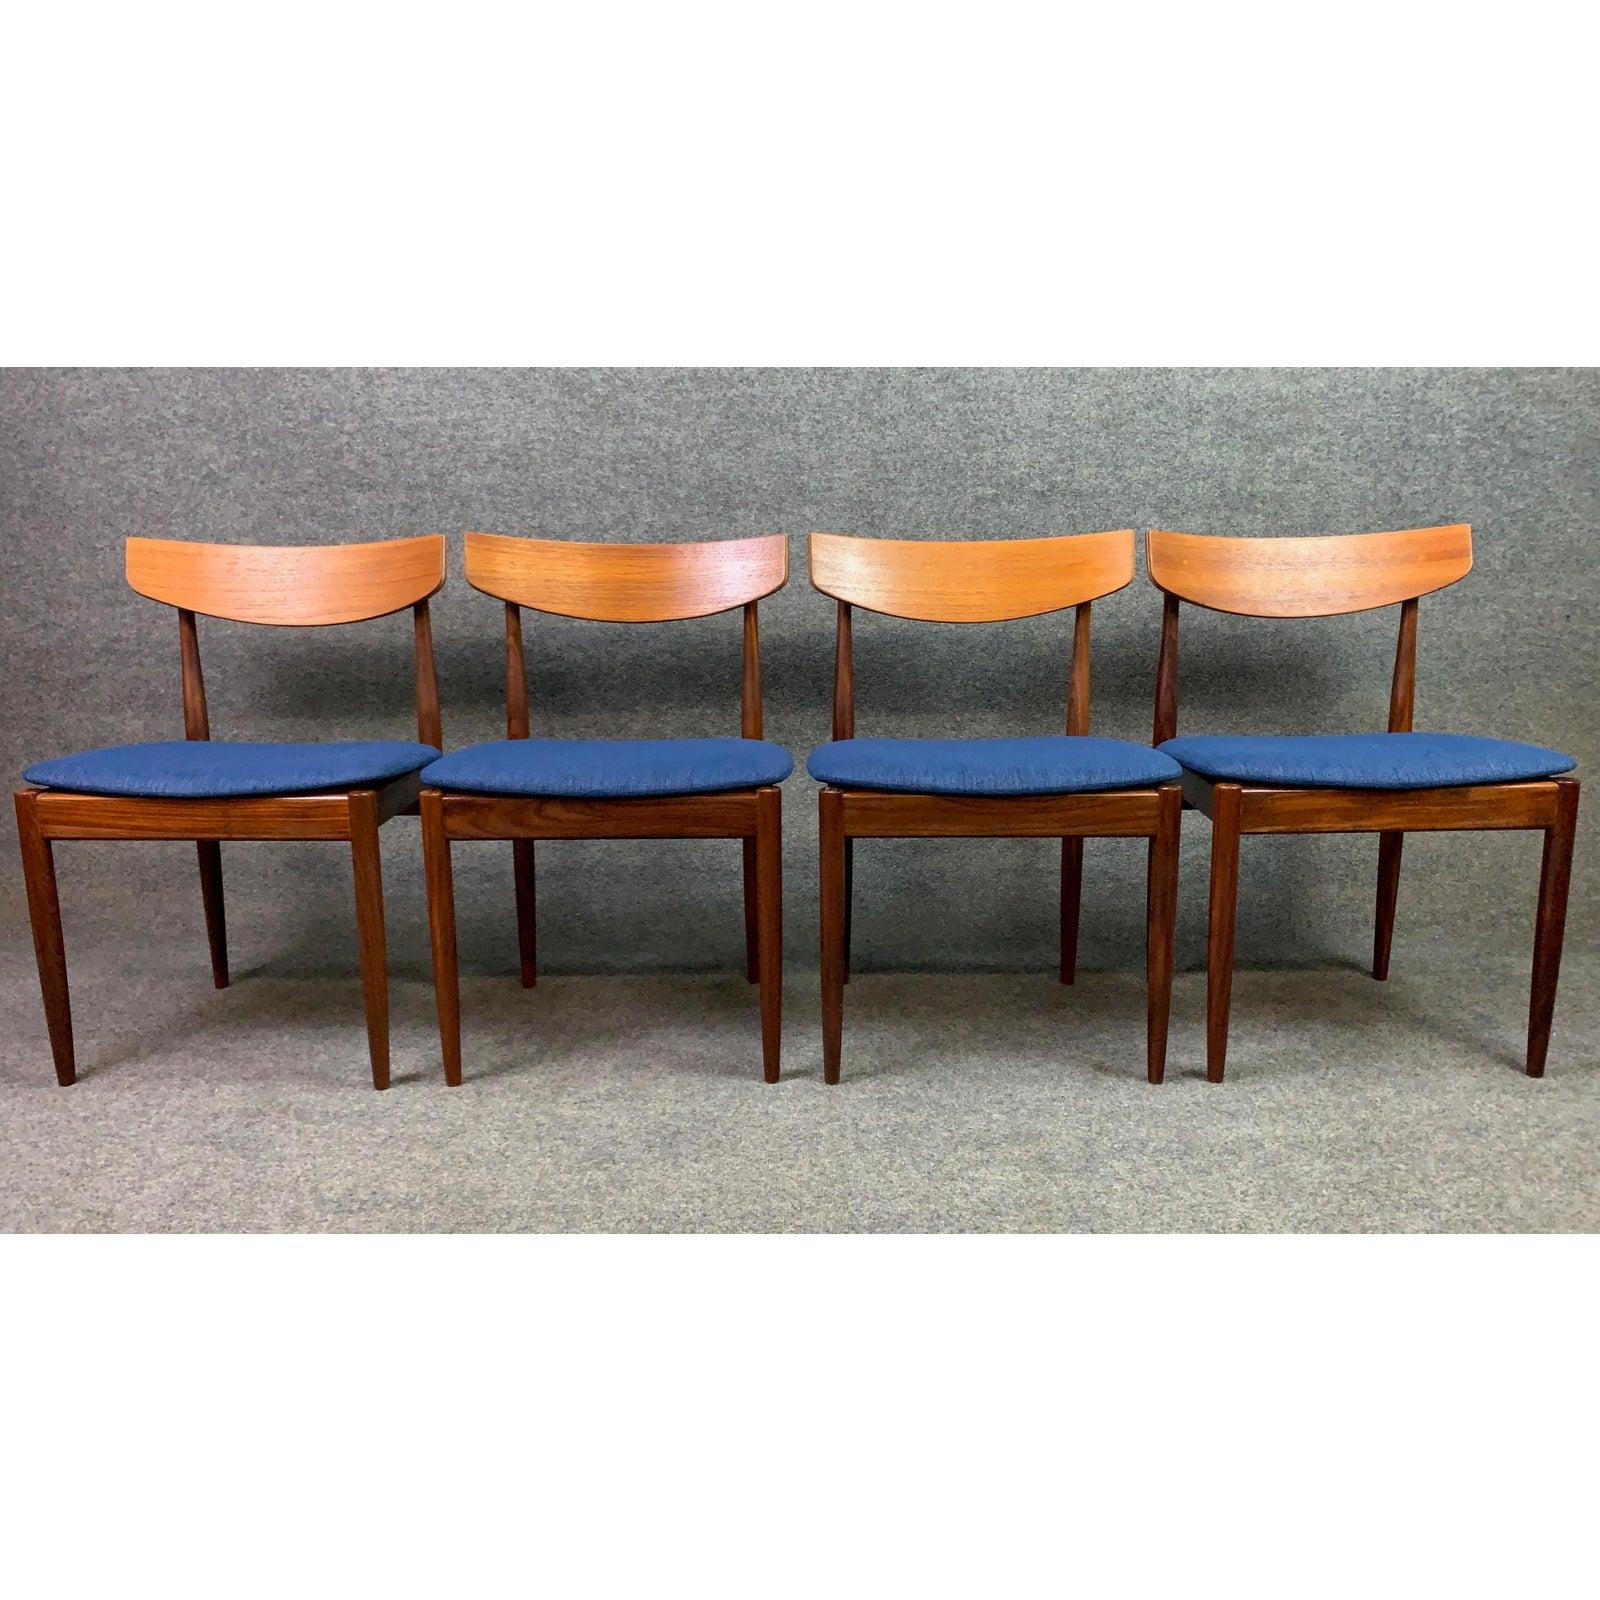 Here is a beautiful set of four MCM dining chairs in teak designed by Ib Kofod-Larsen for the 